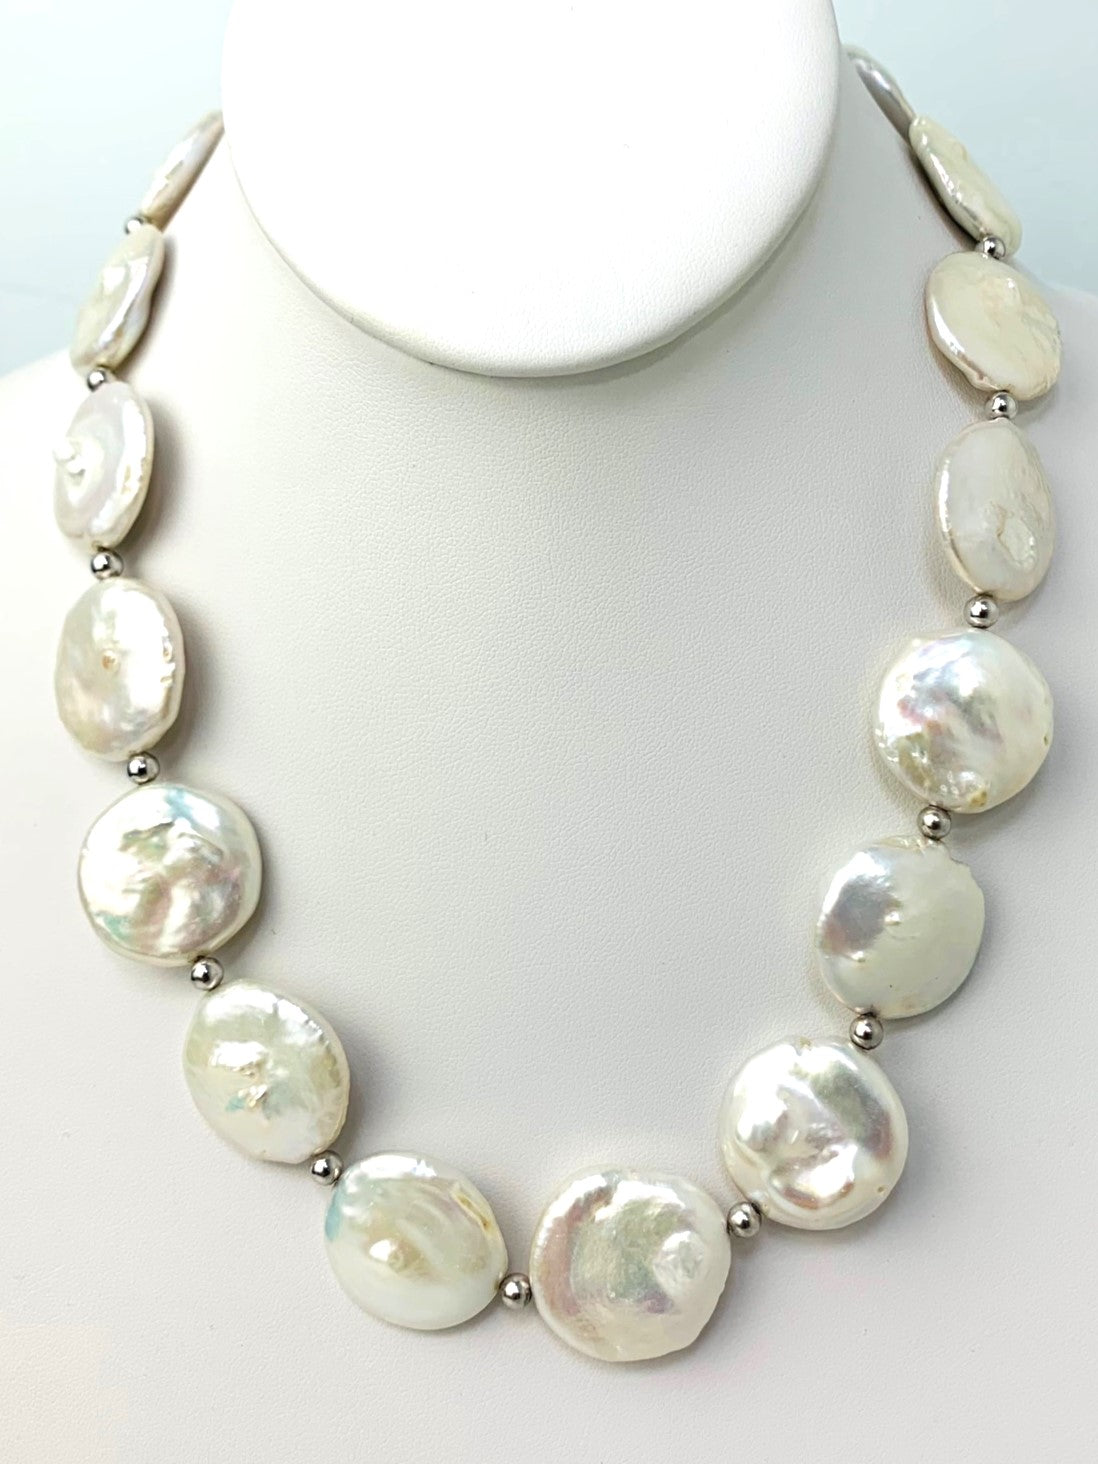 20" Large Freshwater Coin Pearl Necklace With Silver Beads And Clasp in SS - NCK-206-CRDPRLSS-WH-20